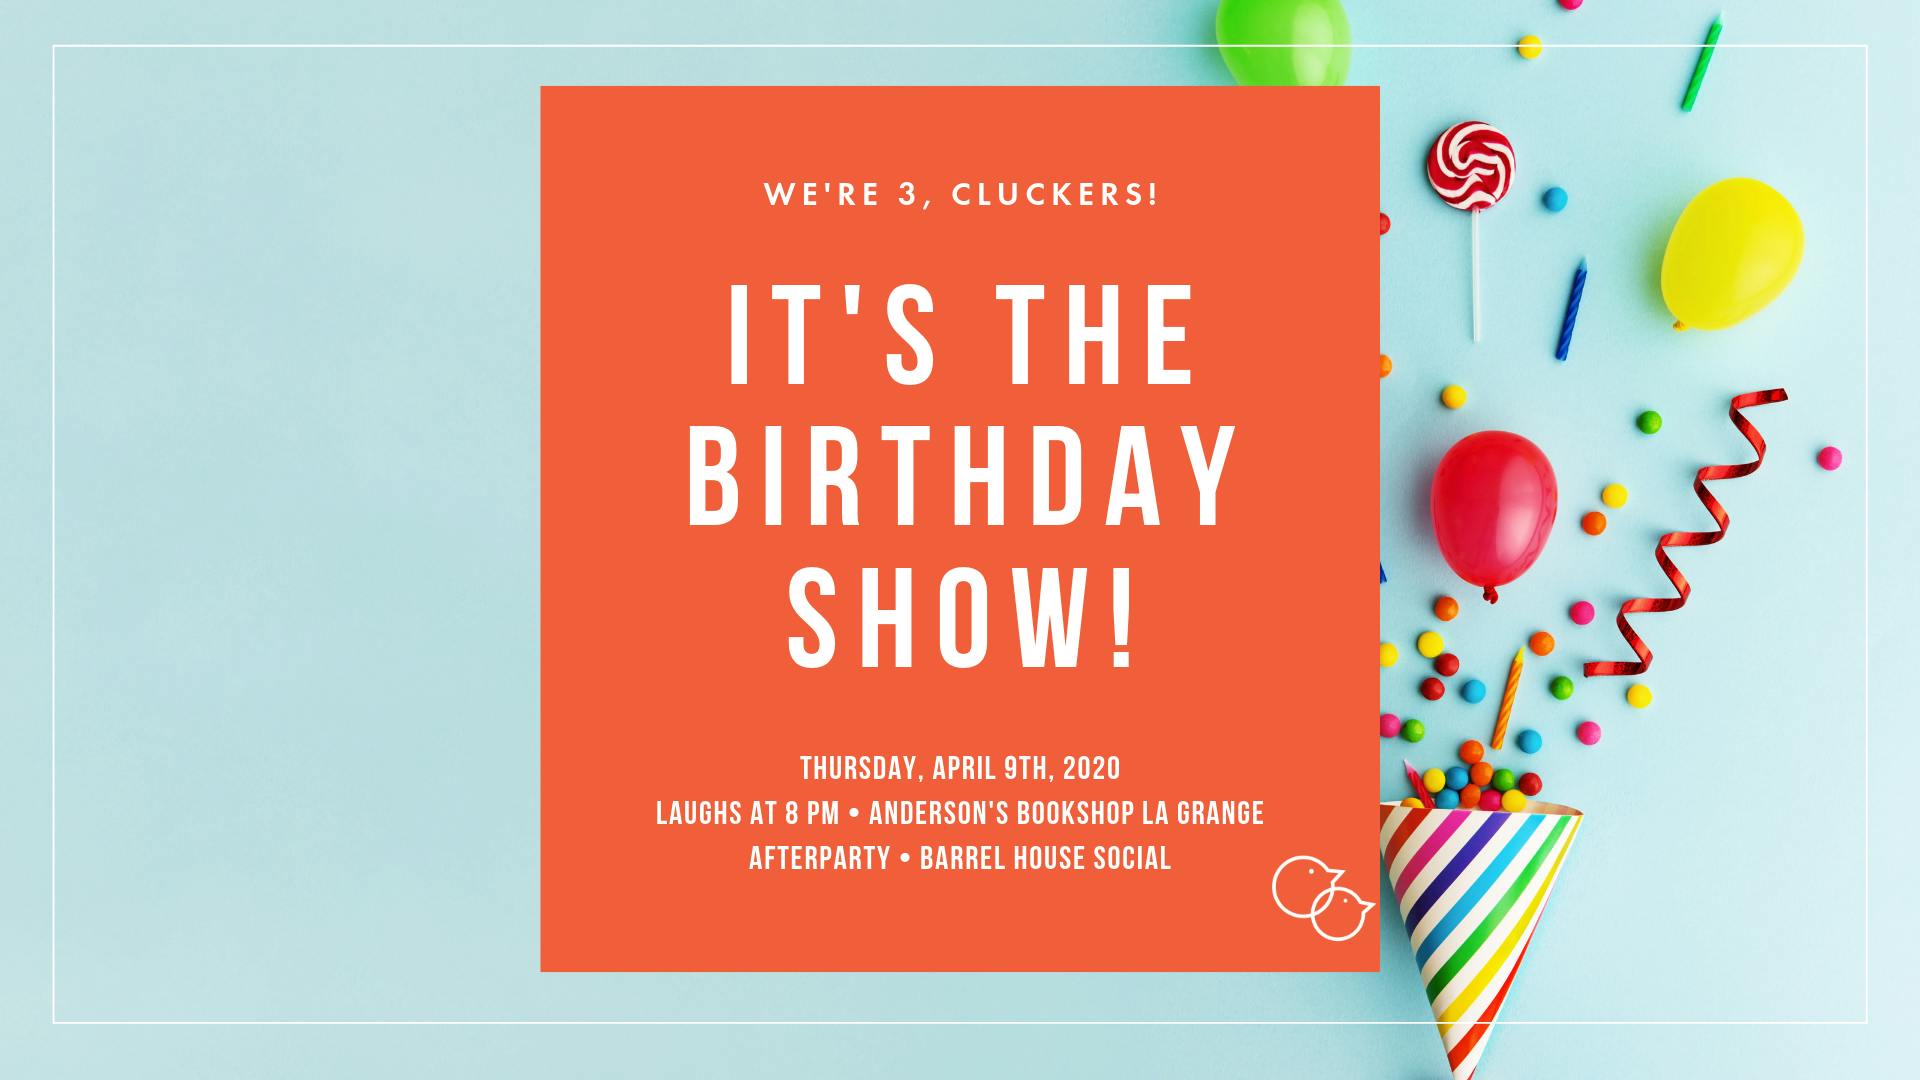 It's Our Third Birthday Show!